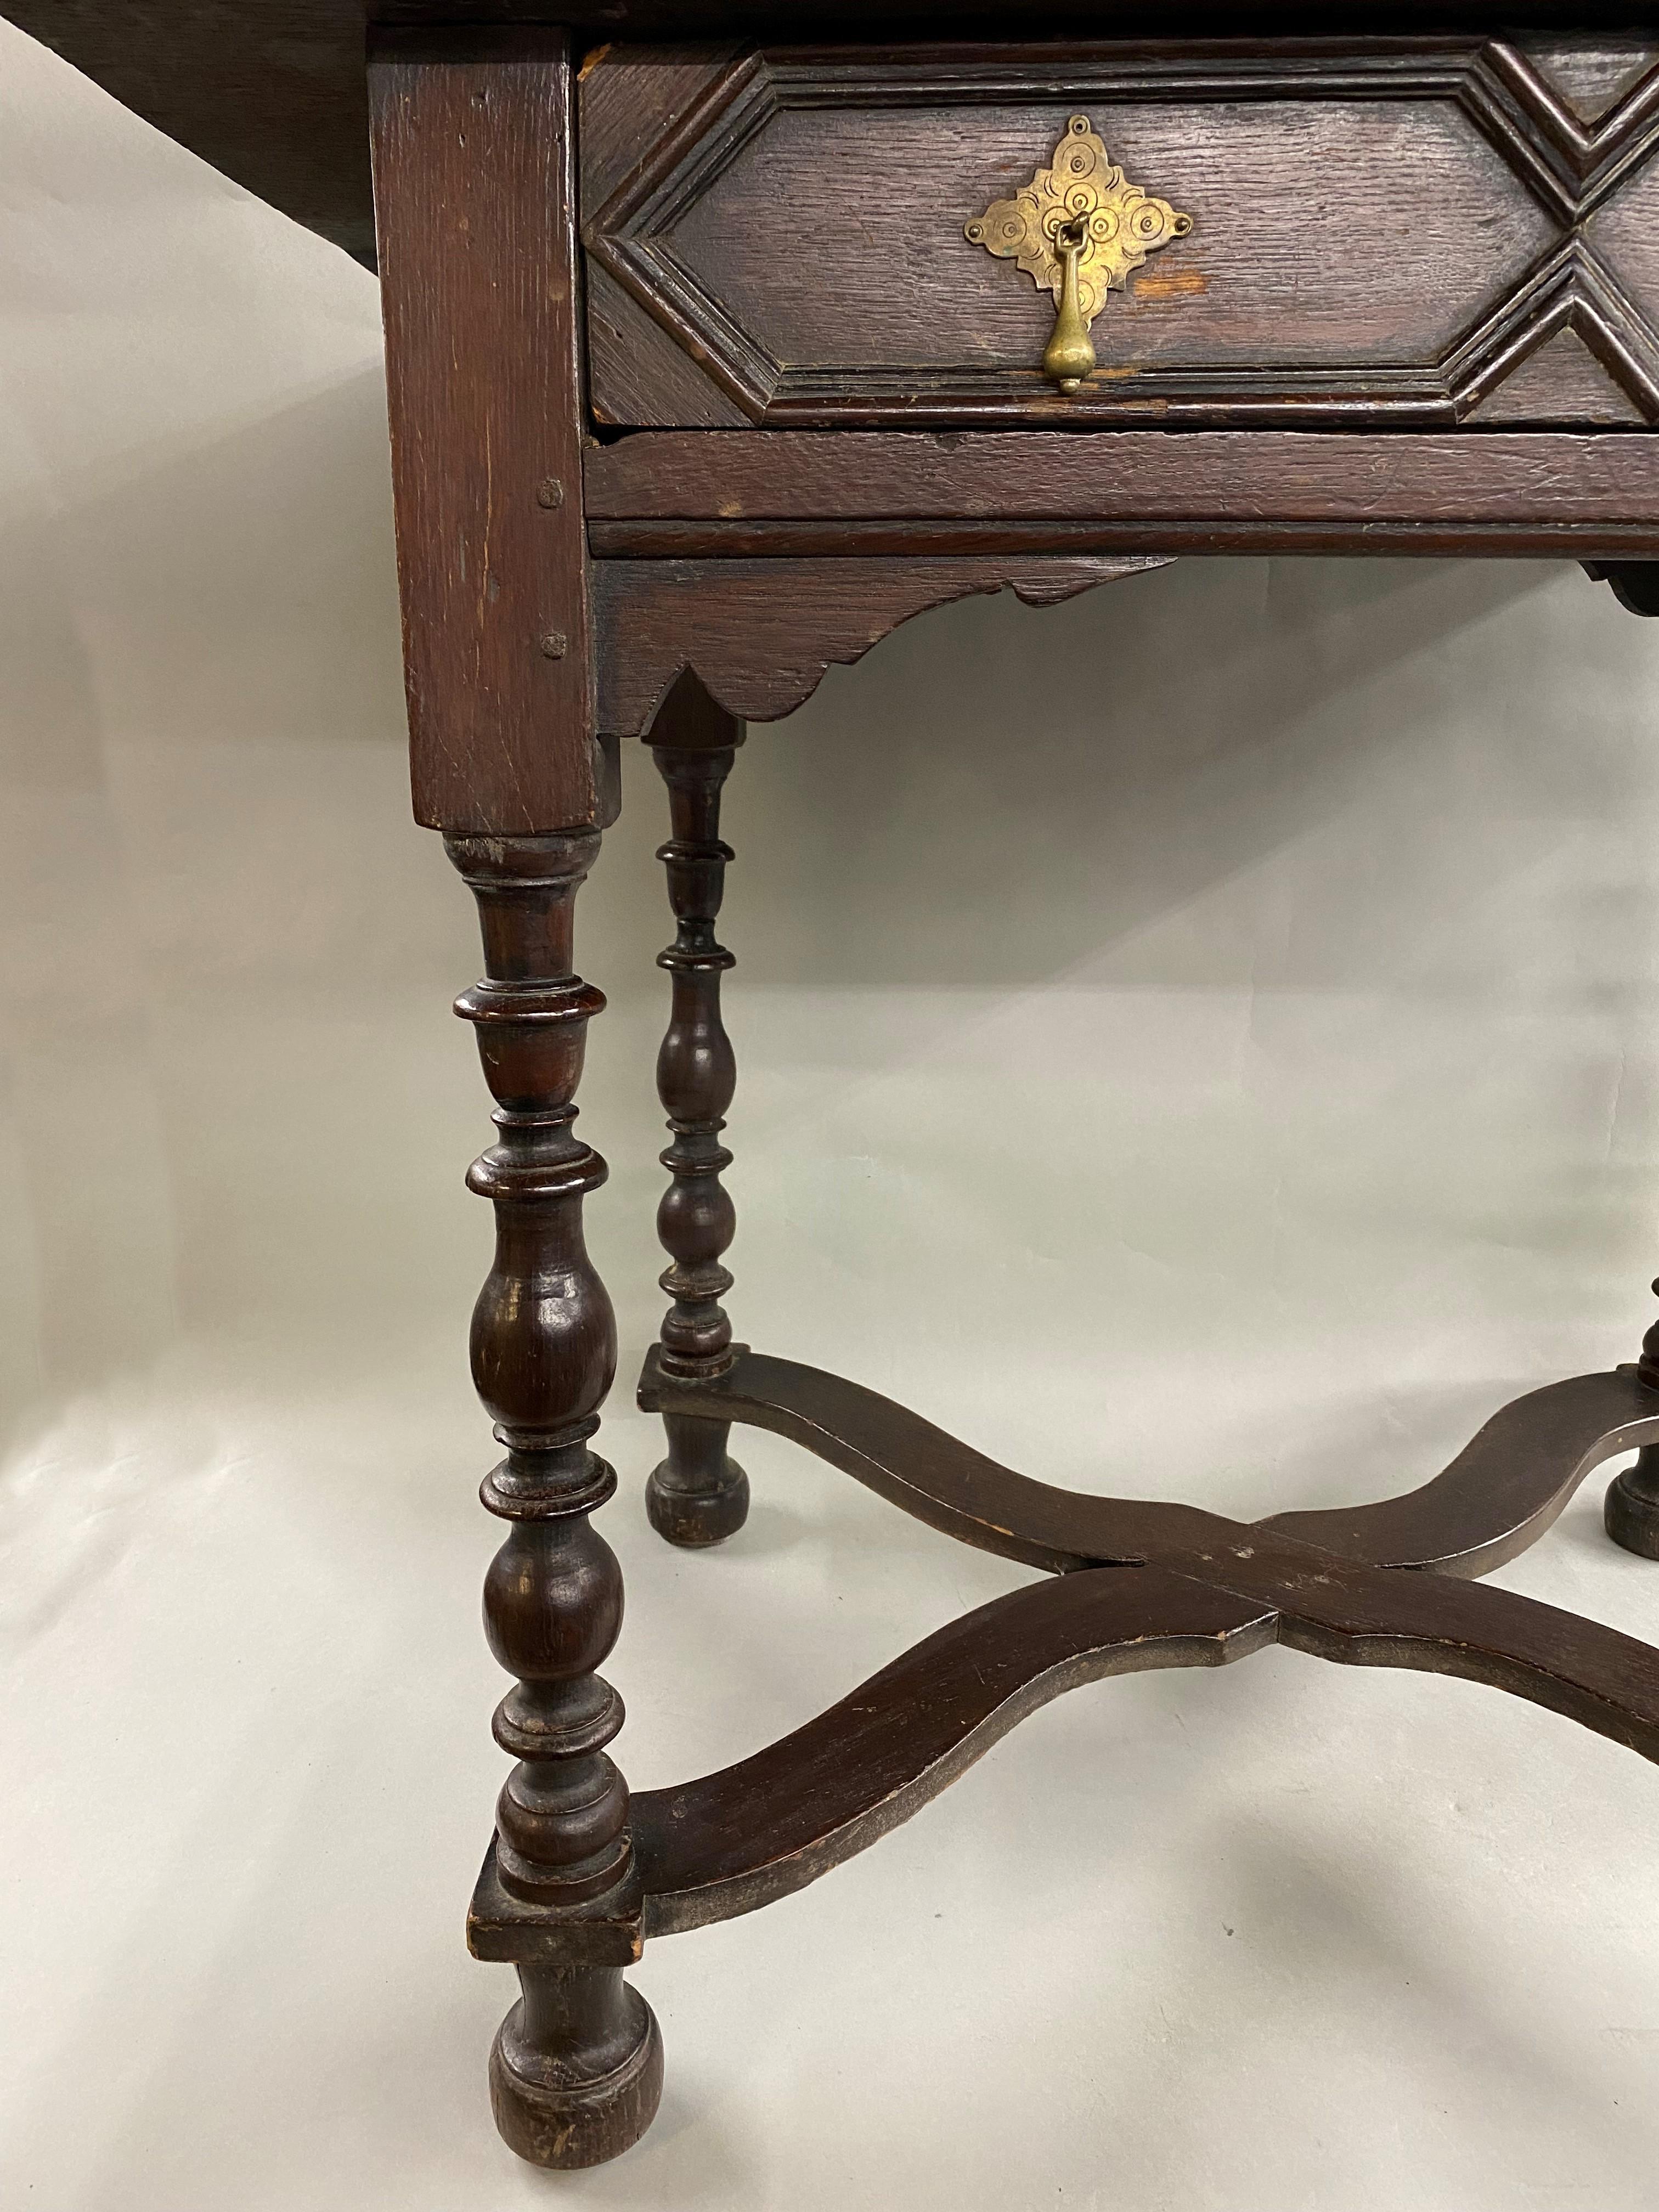 A William & Mary one-drawer oak dressing table with rectangular molded edge top surmounting a single frieze drawer with raised hexagonal panels and brass drop pulls, supported by four nicely turned legs with a shaped base stretcher. The table dates